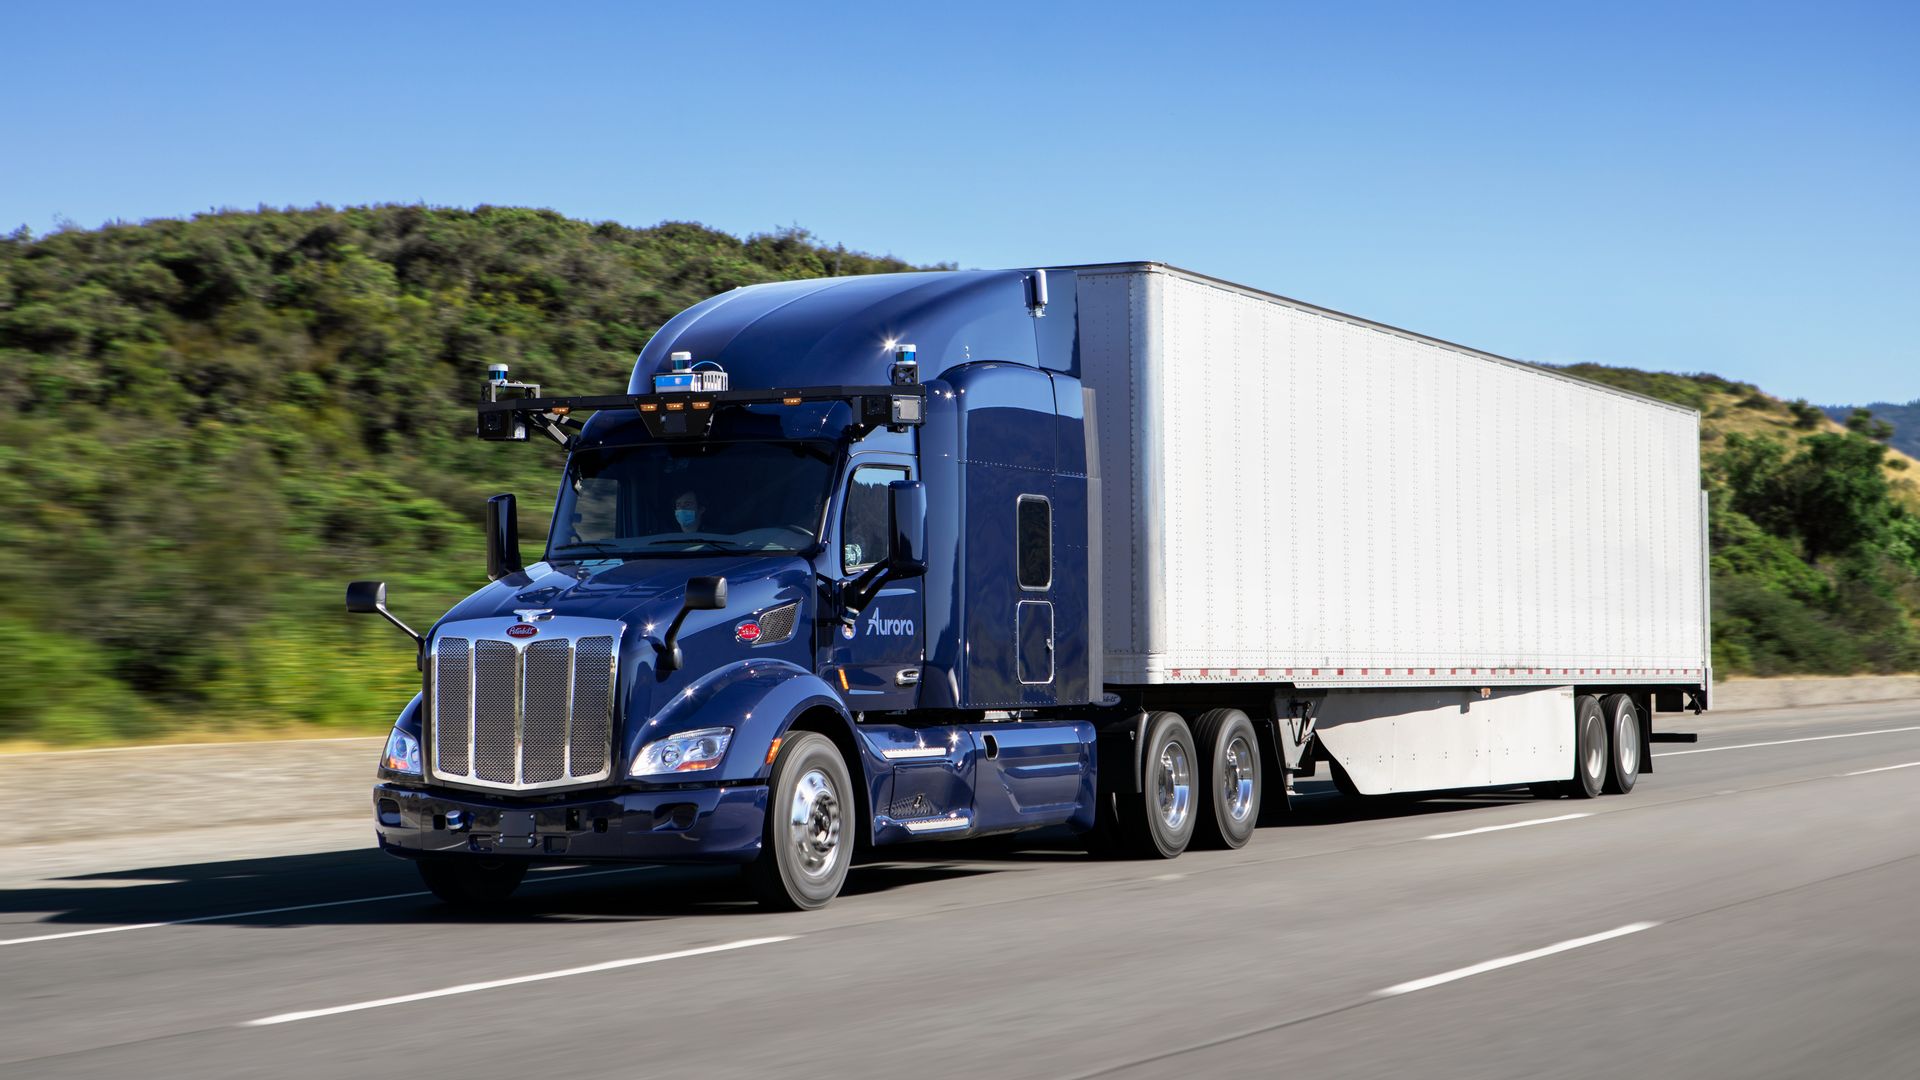 Image of a PACCAR semi-truck equipped with Aurora's self-driving technology.